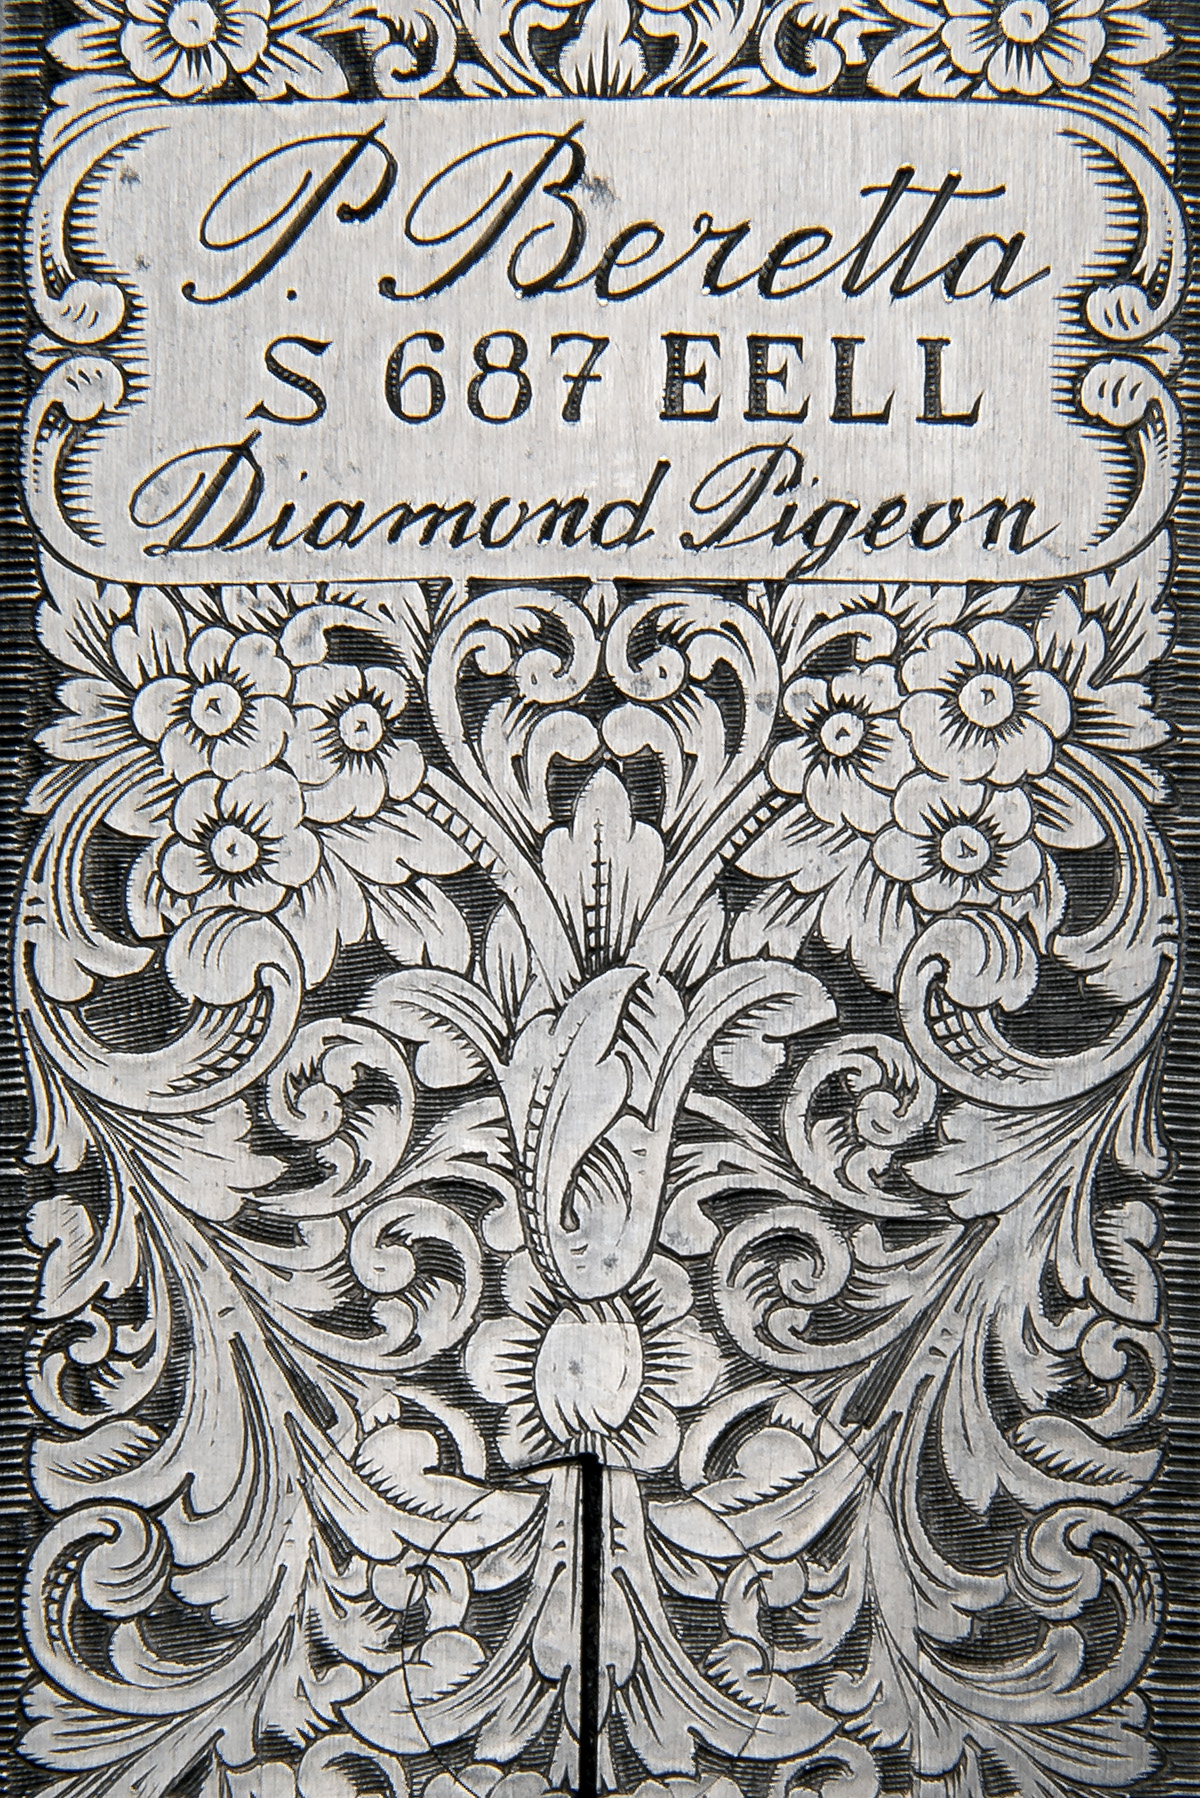 P. BERETTA A PAIR OF 12-BORE (3IN.) 'S687 EELL DIAMOND PIGEON' SINGLE-TRIGGER SIDEPLATED OVER AND - Image 9 of 10